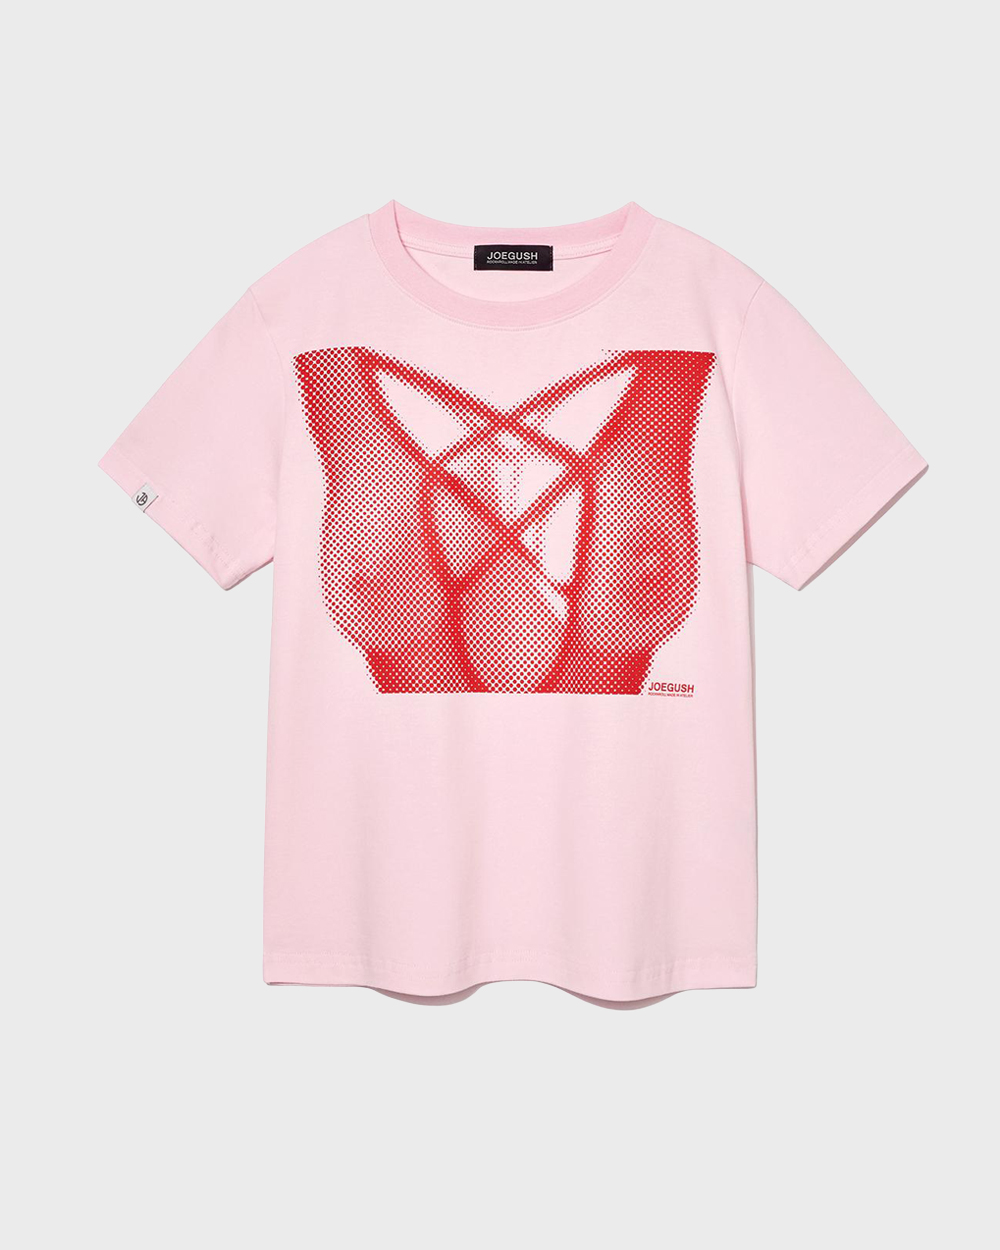 X-ray Boobs T-Shirt (Crop Ver.) (Baby Pink/Red)